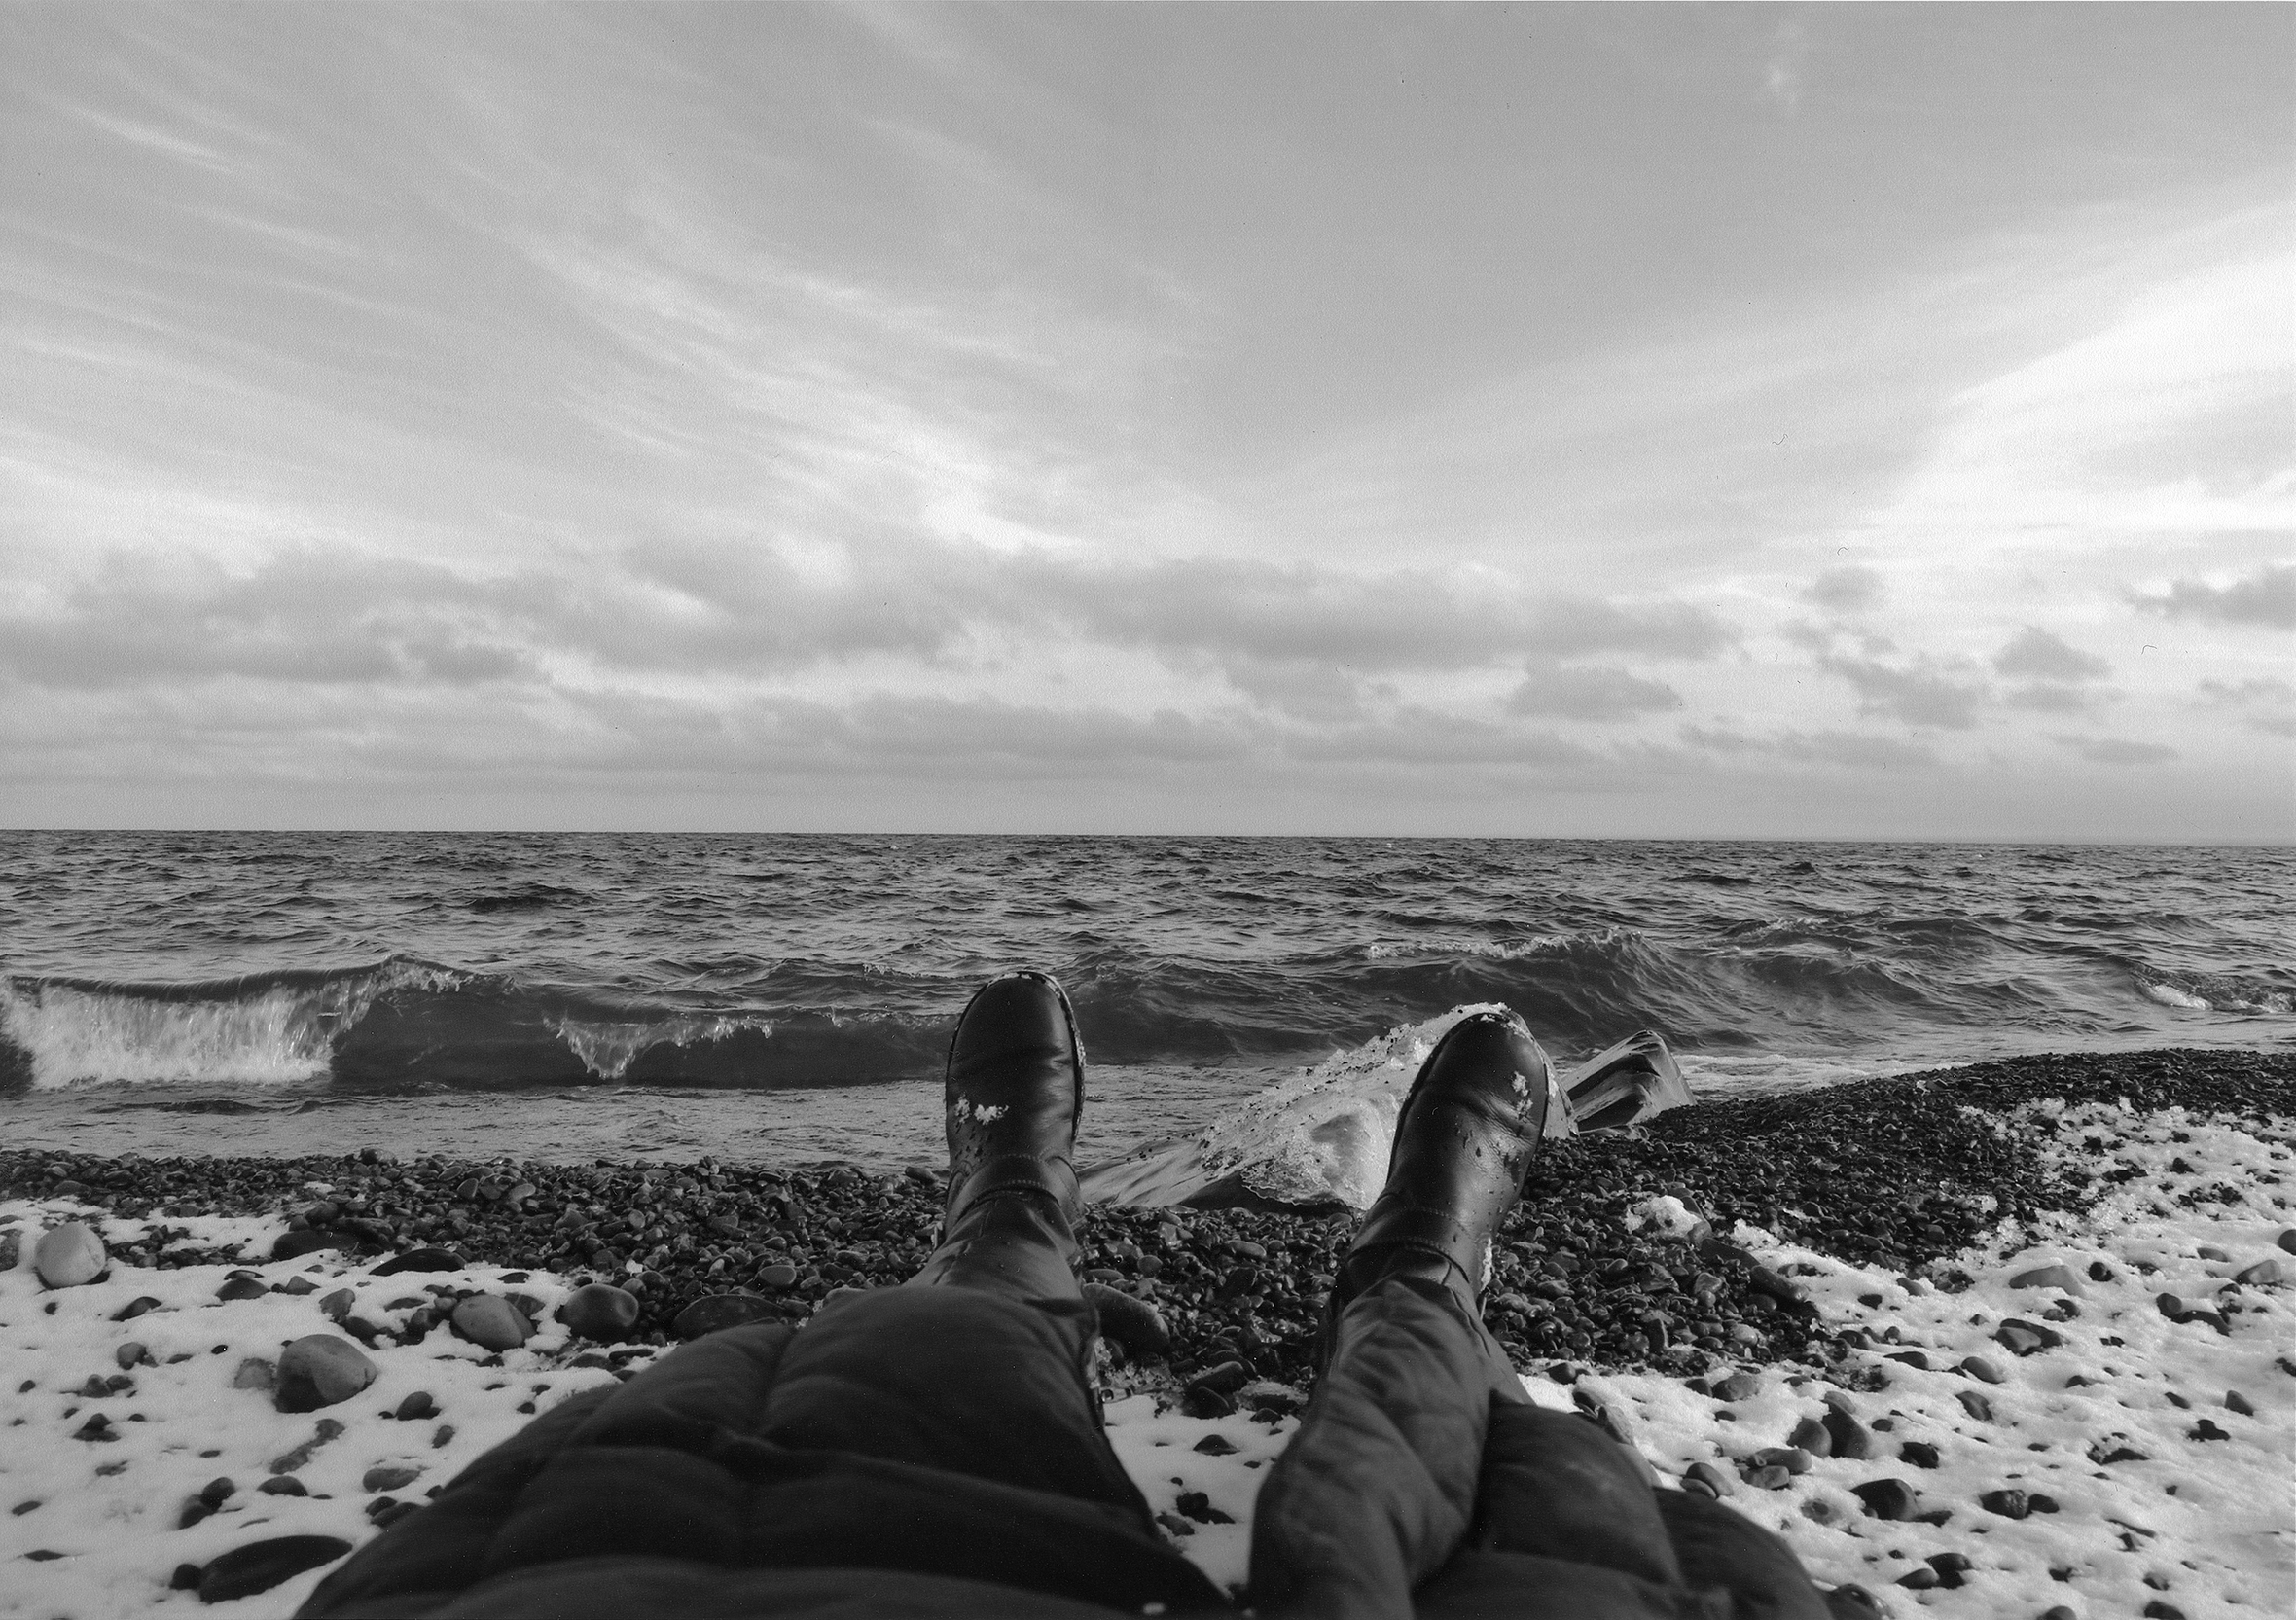 The bottom part of a person in a puffy coat and boots lying on their back on a snow-covered, black, rocky beach with their boots pointed toward the ocean.